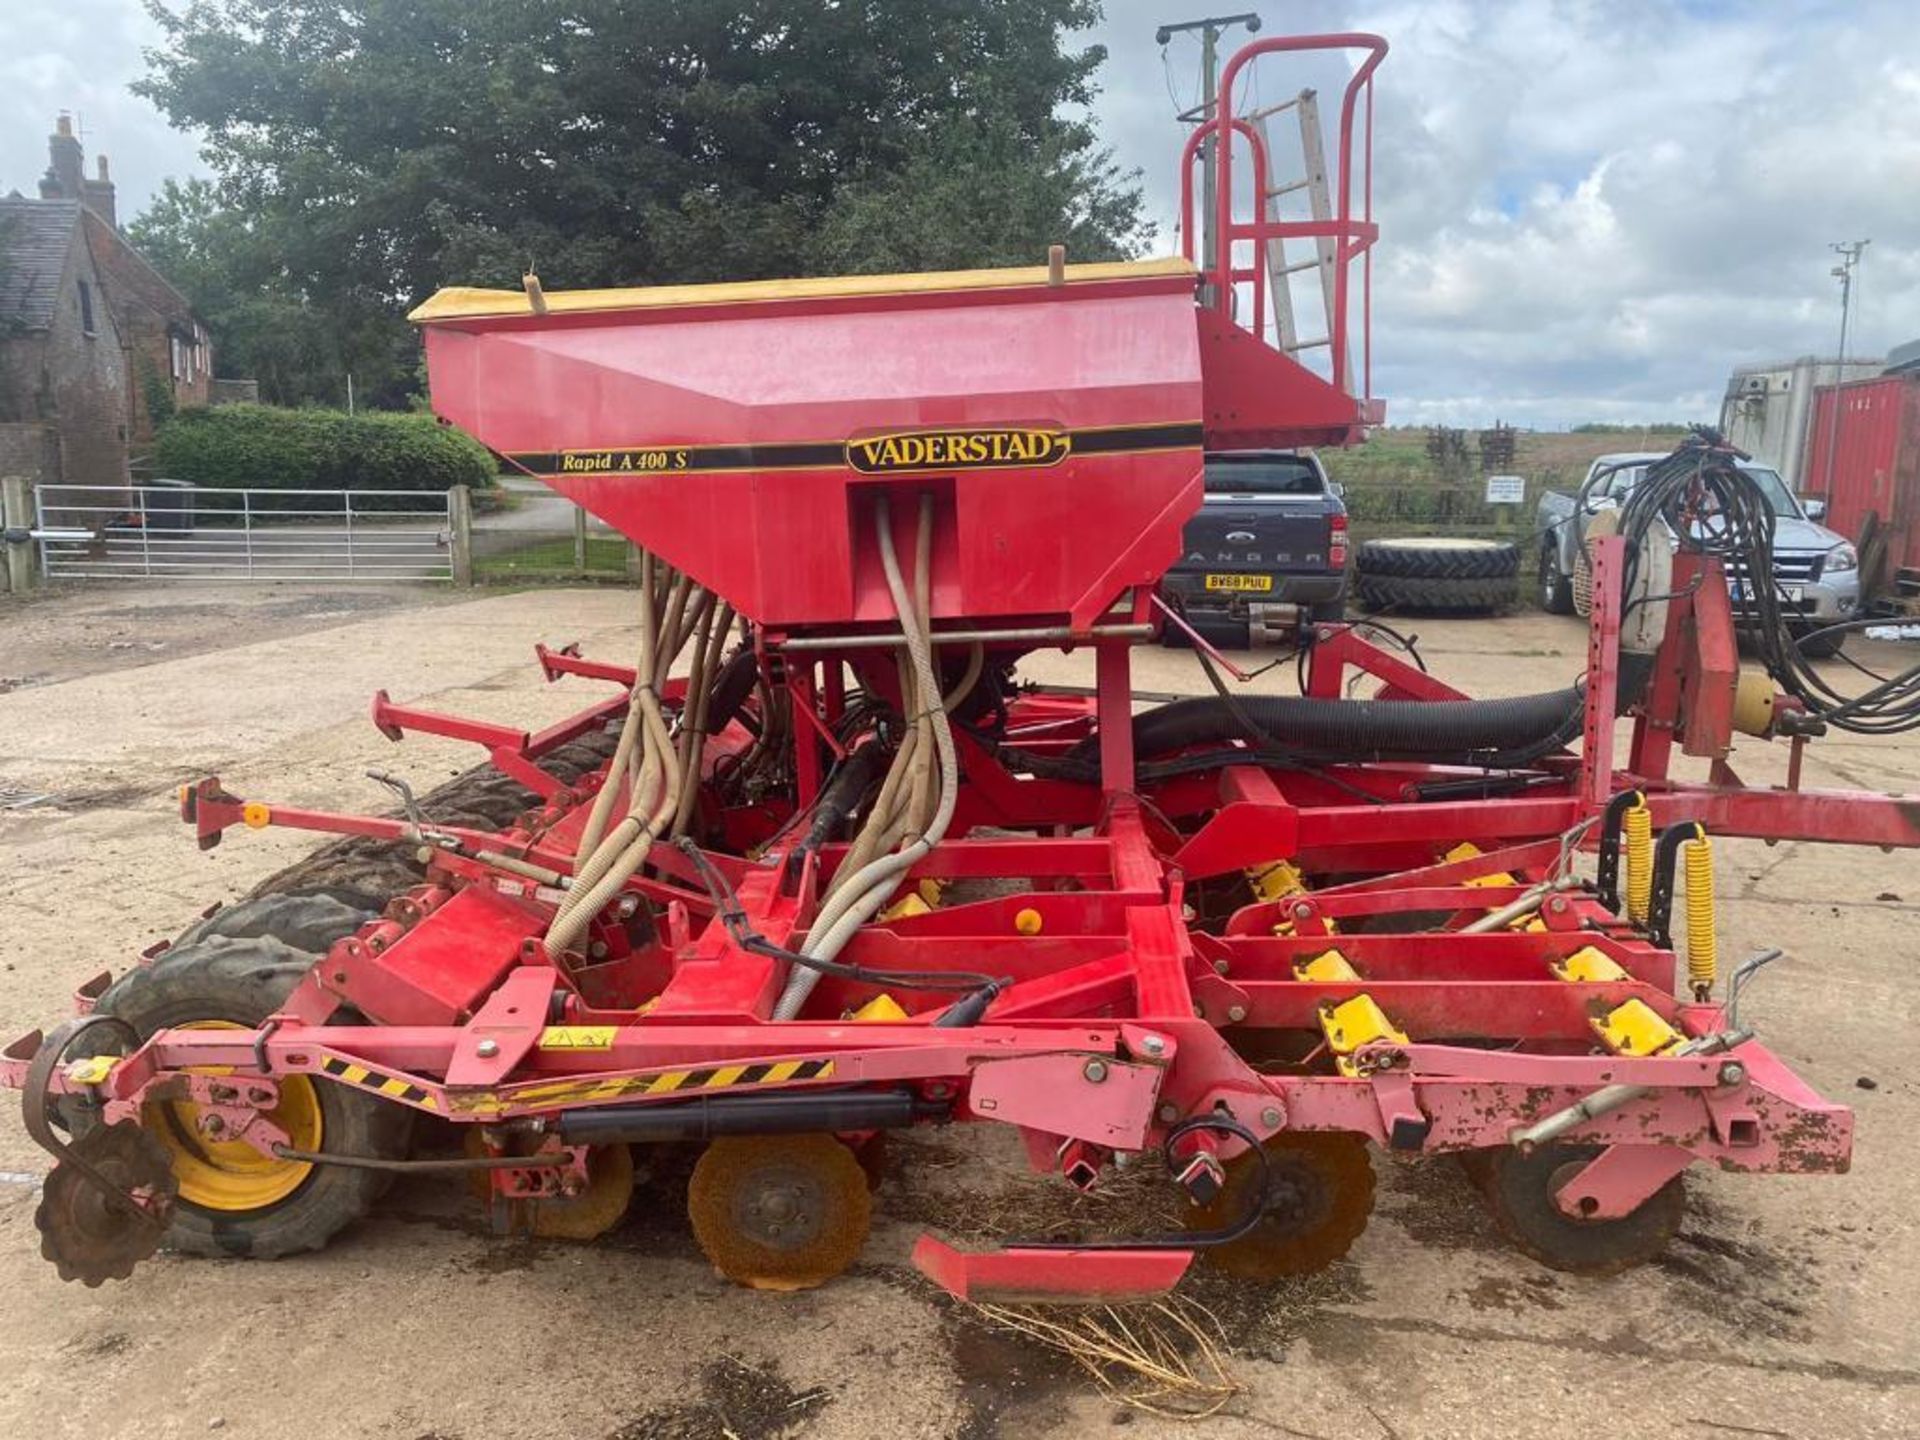 2002 Vaderstad Rapid 400s 4m disc system drill. Serial No: 12243. Hectares: 7,500. Control box in of - Image 7 of 15